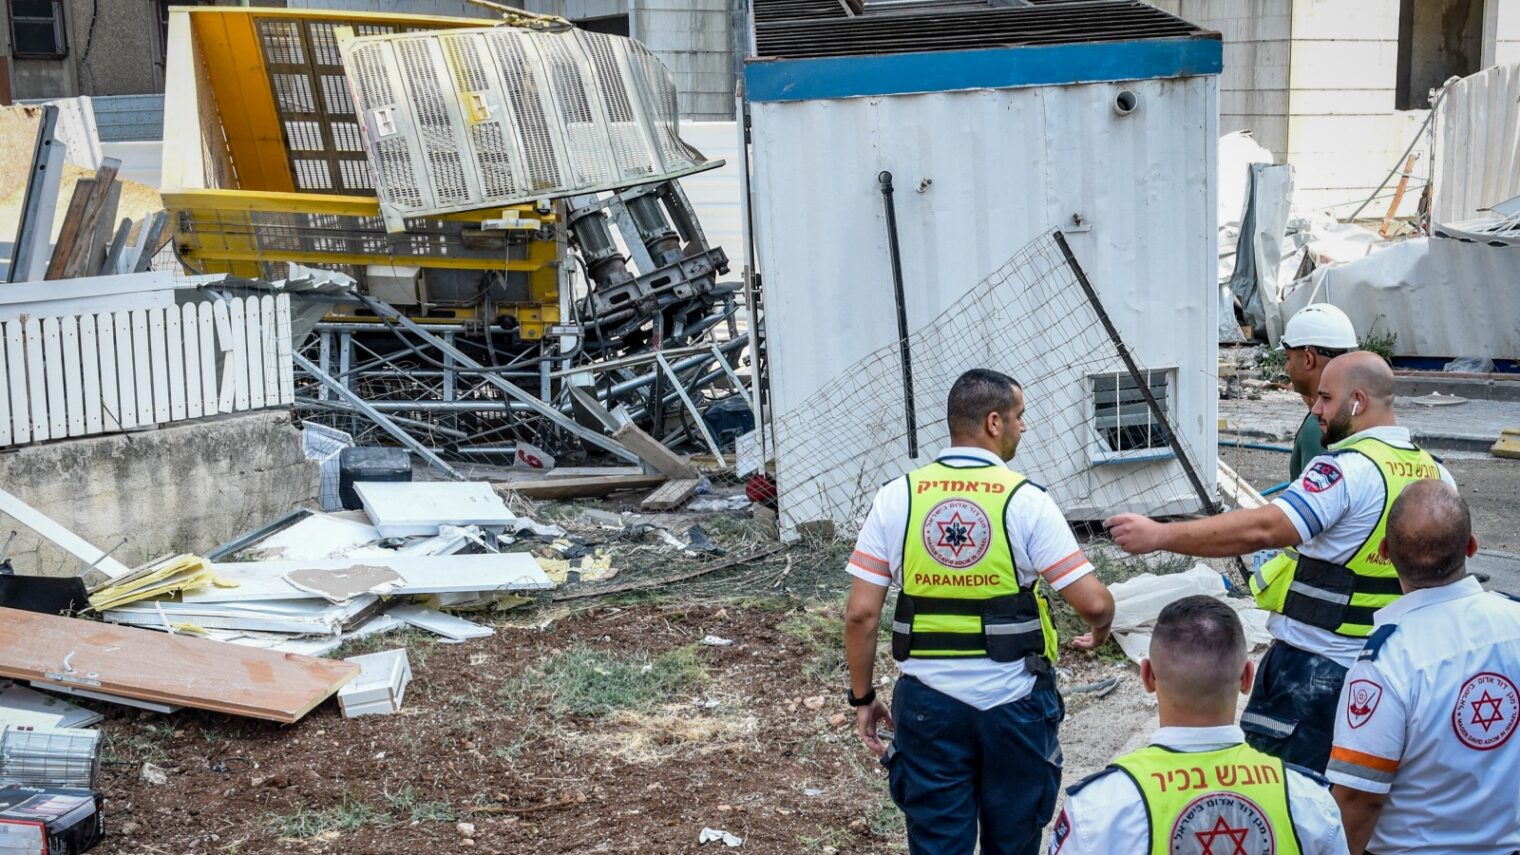 The site where a large container fell in a construction site, leaving two dead and several injured, in northern Israel, August 21, 2022. Photo by Roni Ofer/Flash90